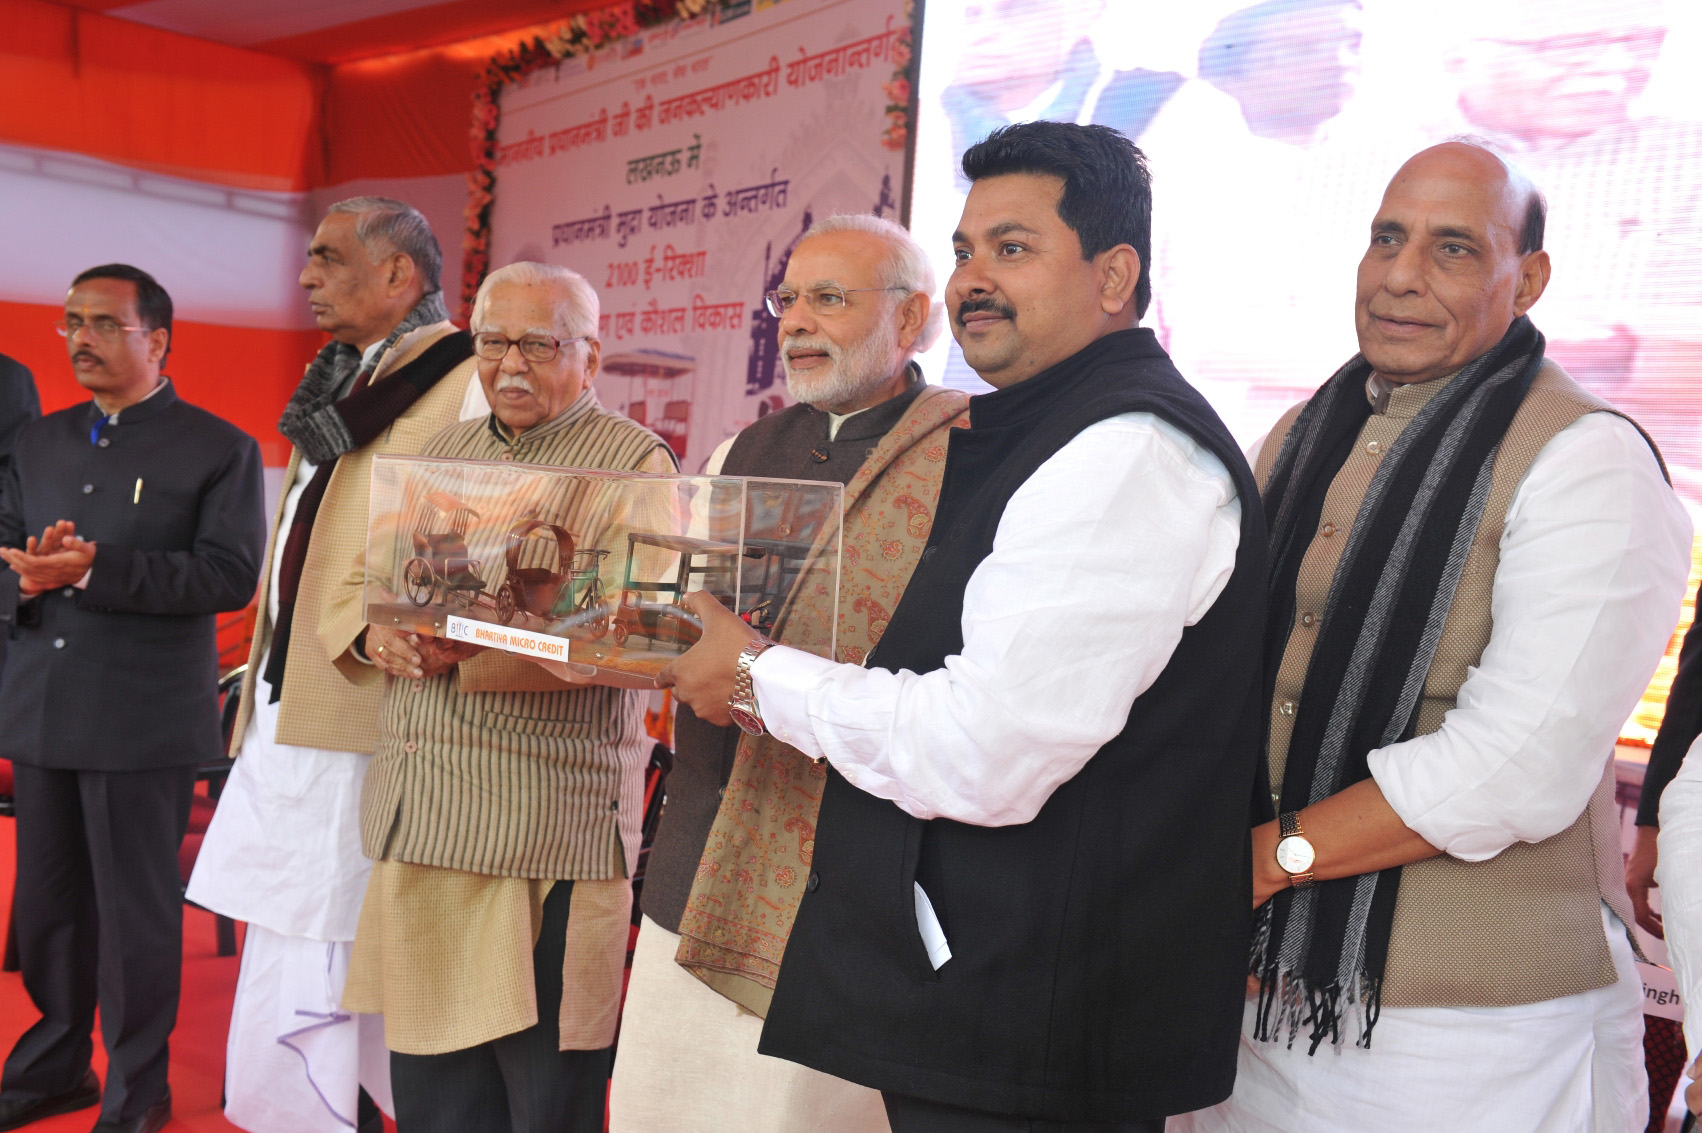 The Prime Minister, Shri Narendra Modi being presented a memento at Rickshaw Sangh programme by the Bhartiya Micro Credit, in Lucknow, Uttar Pradesh on January 22, 2016. 		The Governor of Uttar Pradesh, Shri Ram Naik and the Union Home Minister, Shri Rajnath Singh are also seen.